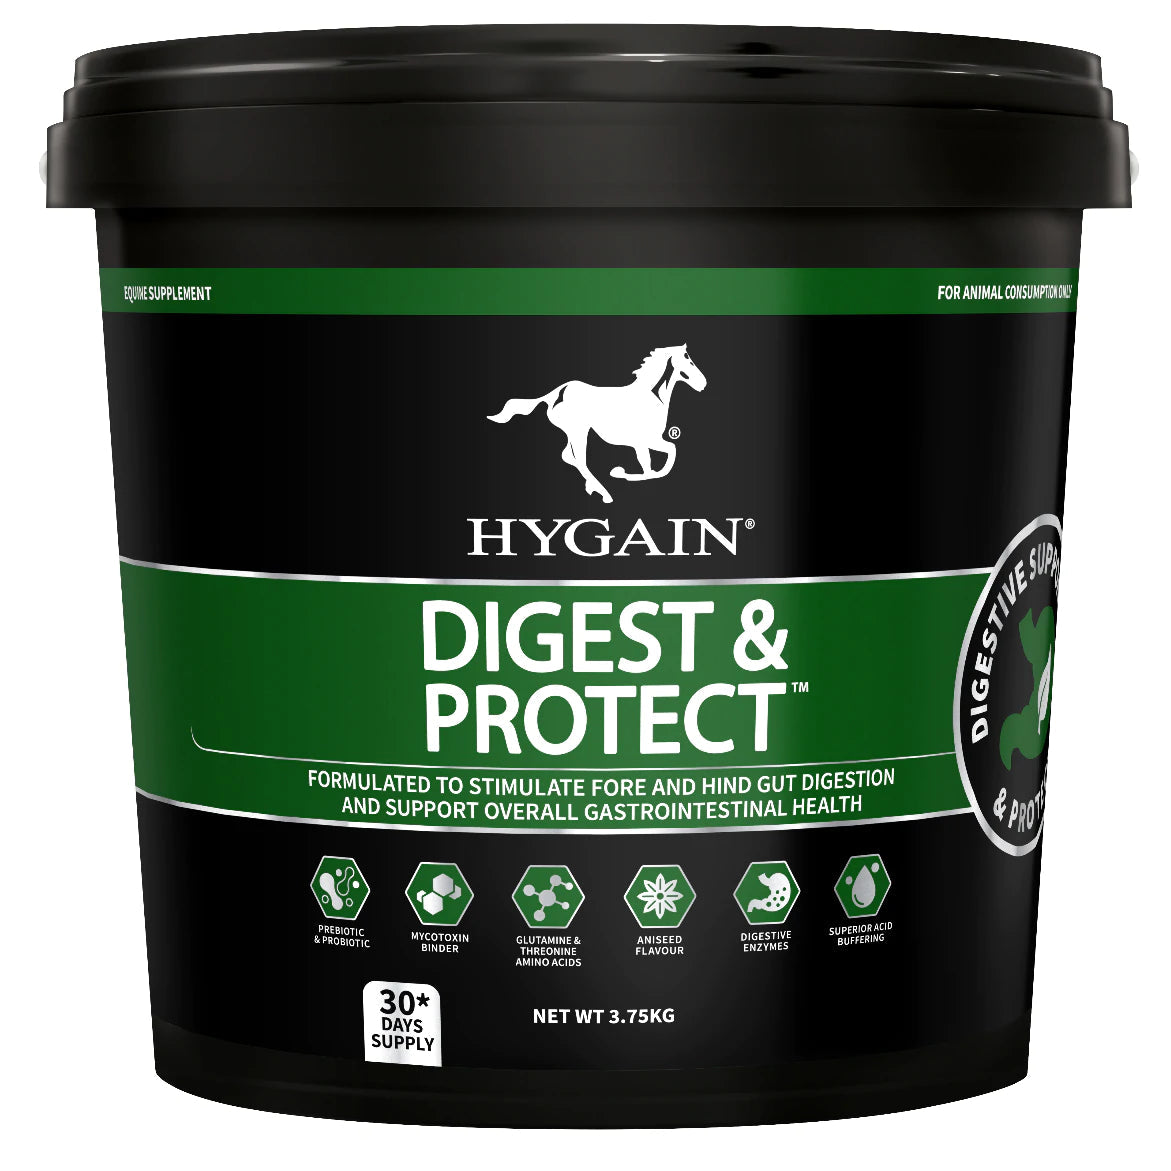 HYGAIN FEED SUPPLEMENTS 3.75KG Hygain Digest & Protect Gut Supplement For Horses